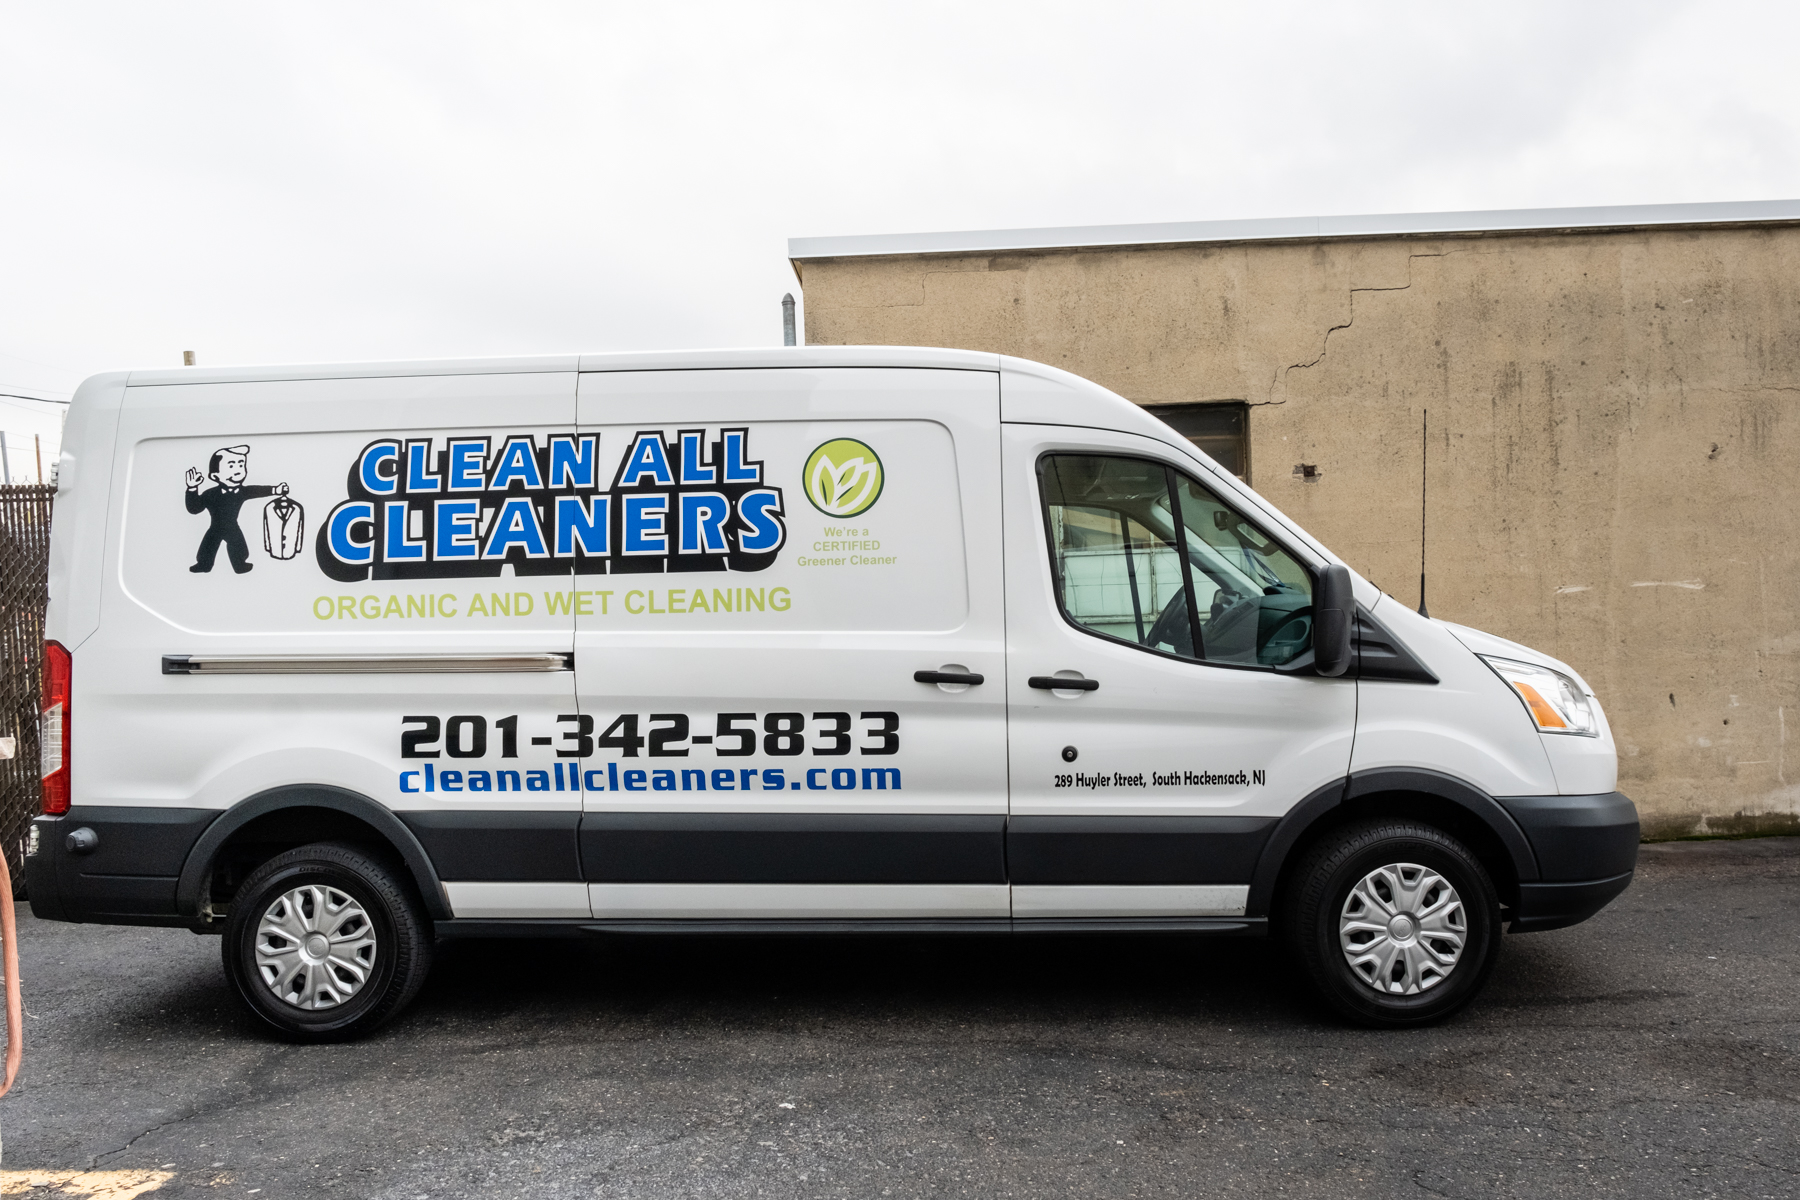 Clean All Cleaners 289 Huyler St, South Hackensack New Jersey 07606